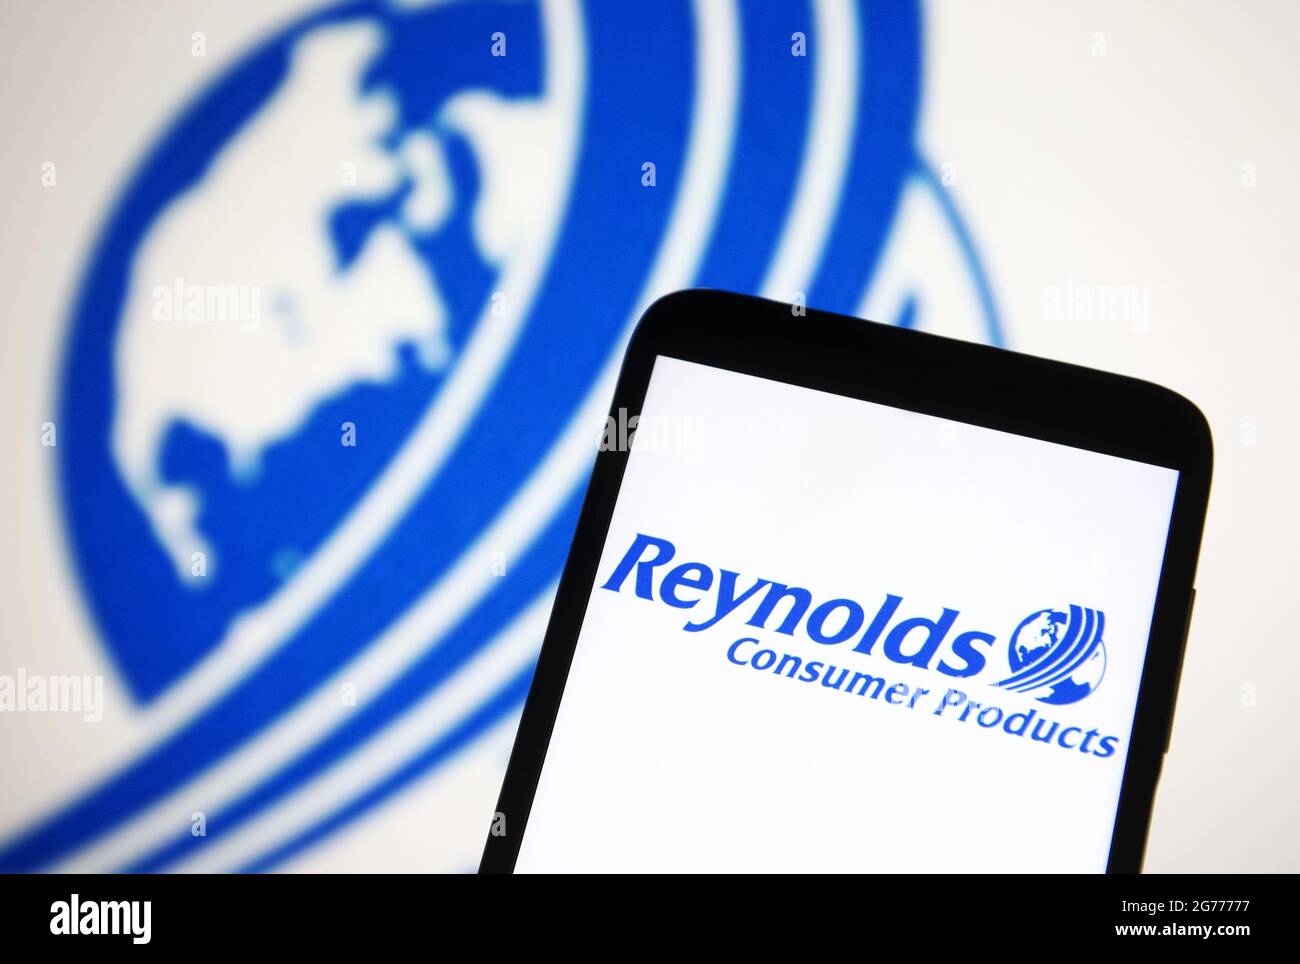 NEWS  Reynolds Consumer Products